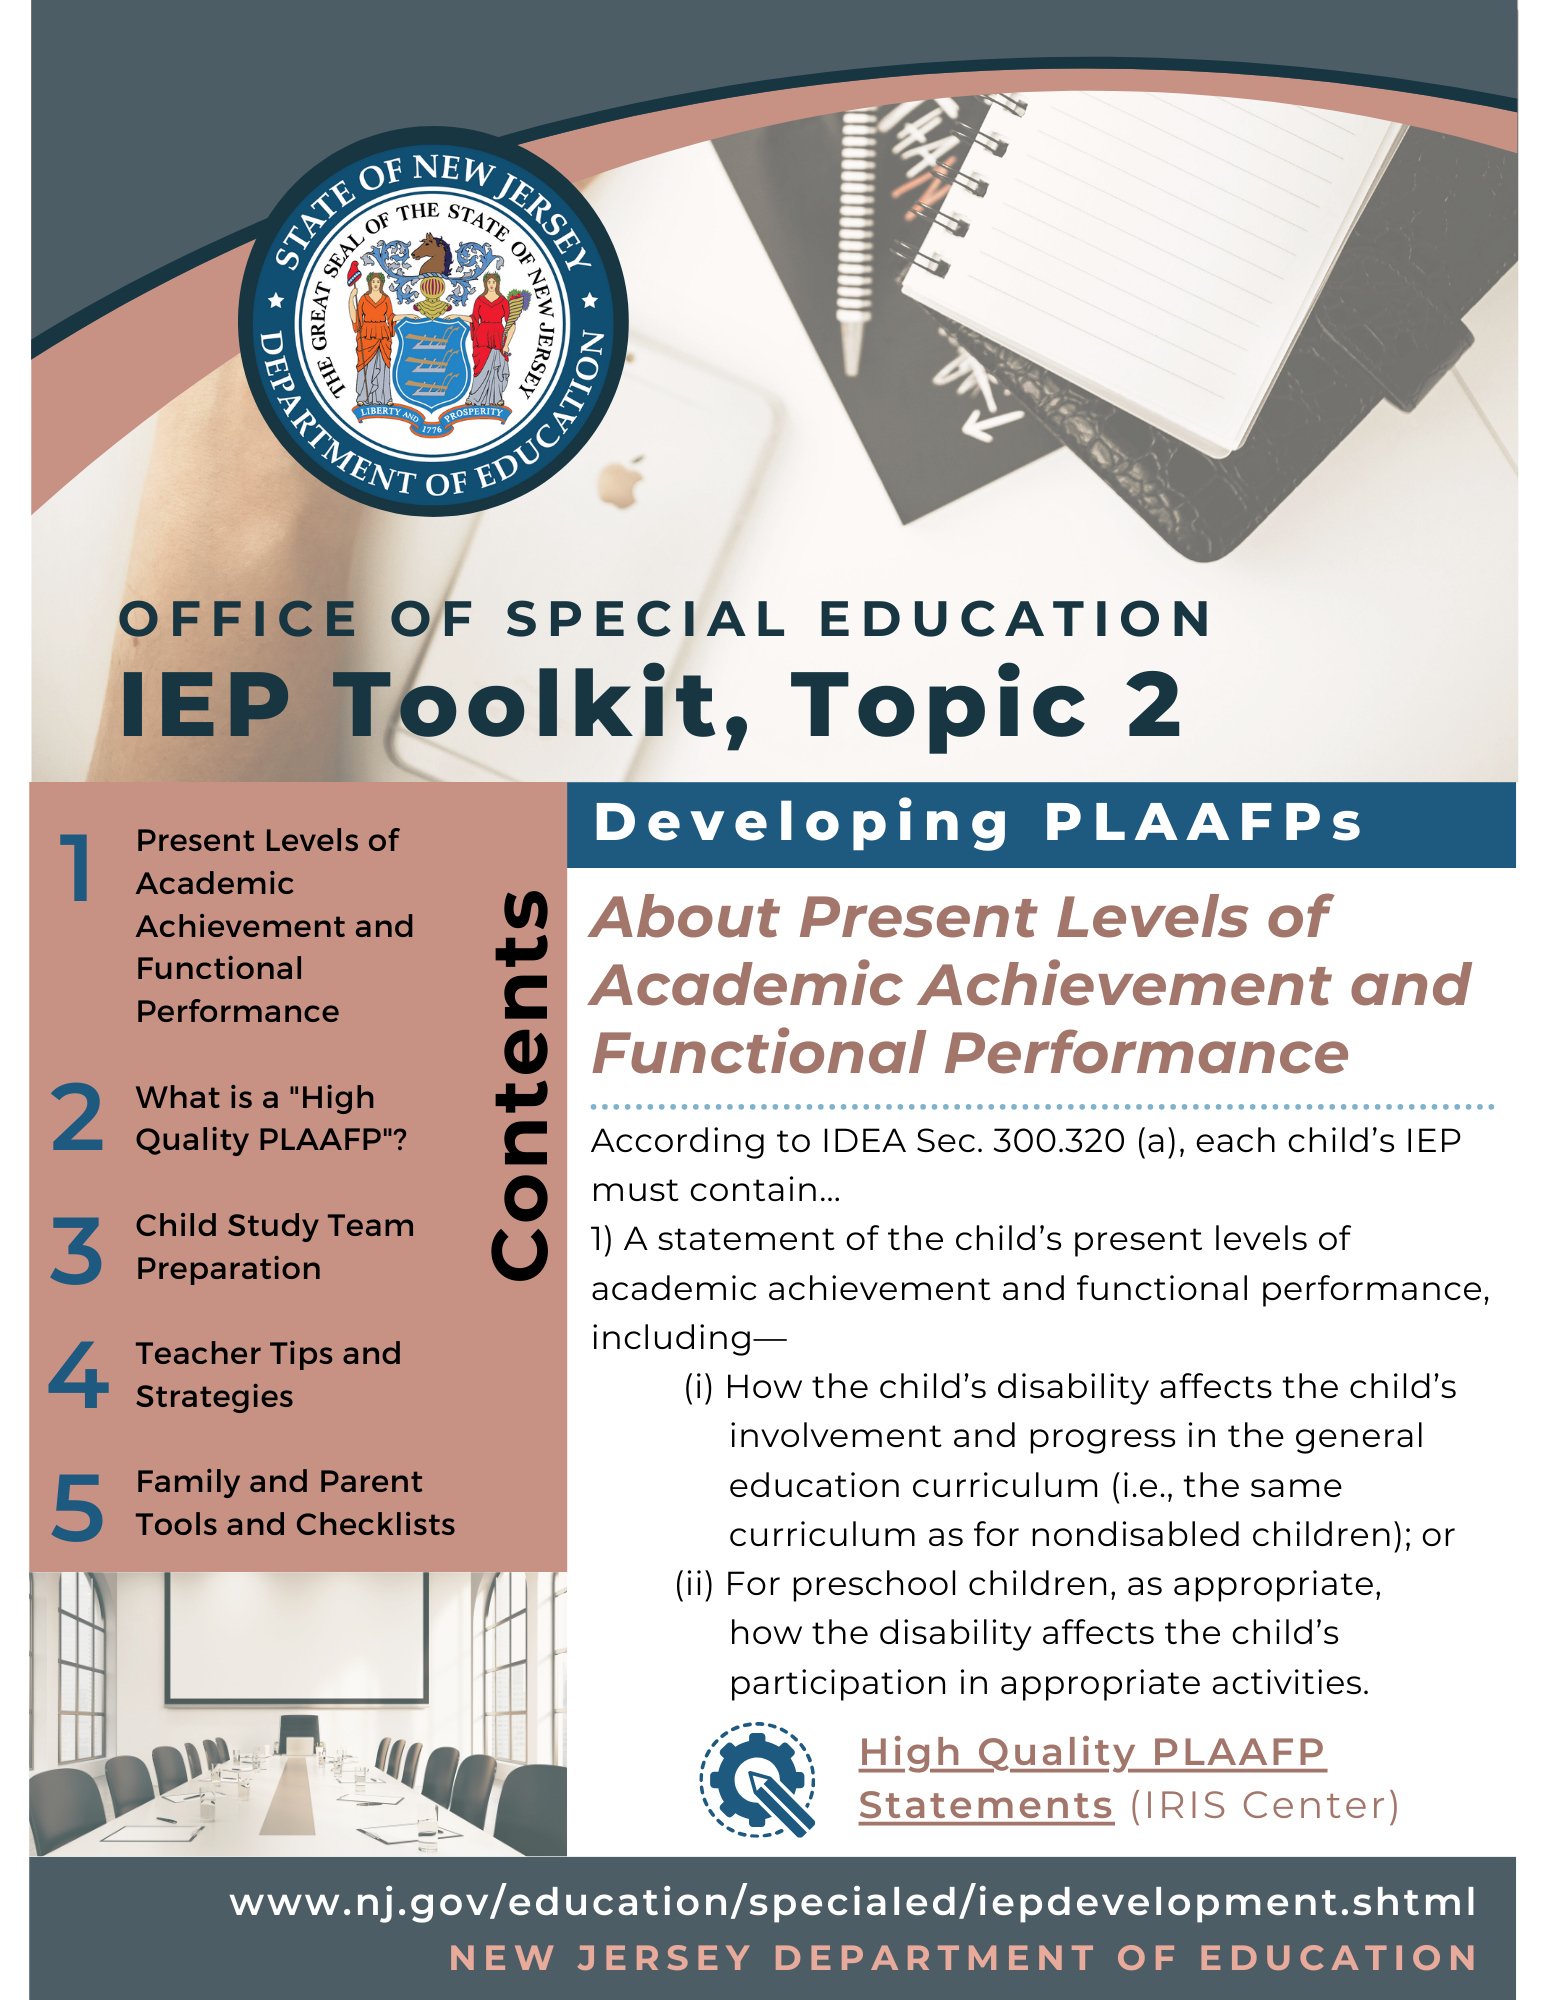 Image showing the title page and front cover of the toolkit that can be seen larger when clicking on the link provided to access the document